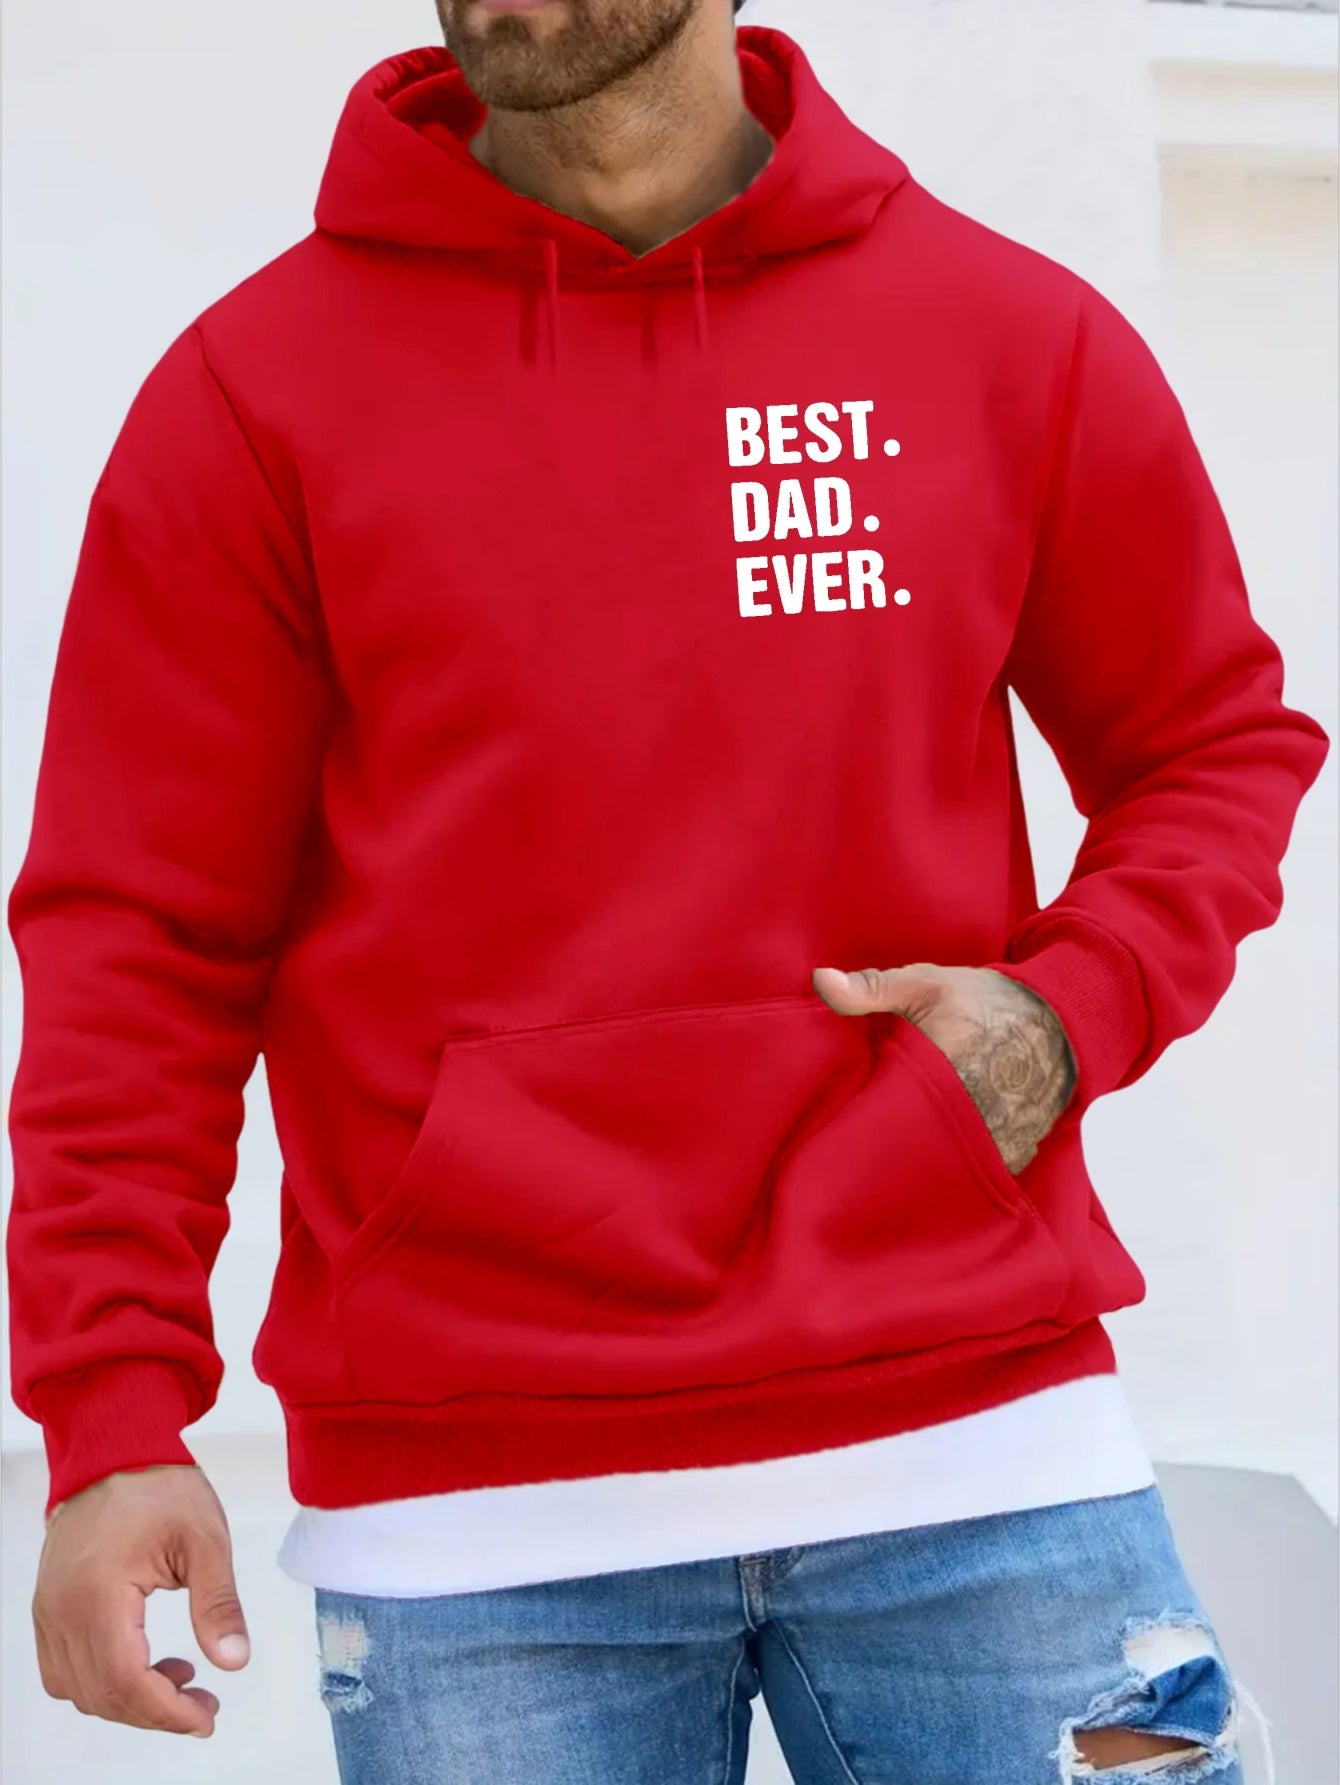 BEST DAD EVER Print Kangaroo Pocket Fleece Sweatshirt Hoodie Pullover, Fashion Street Style Long Sleeve Sports Tops, Graphic Pullover Shirts For Men Autumn Winter Gifts